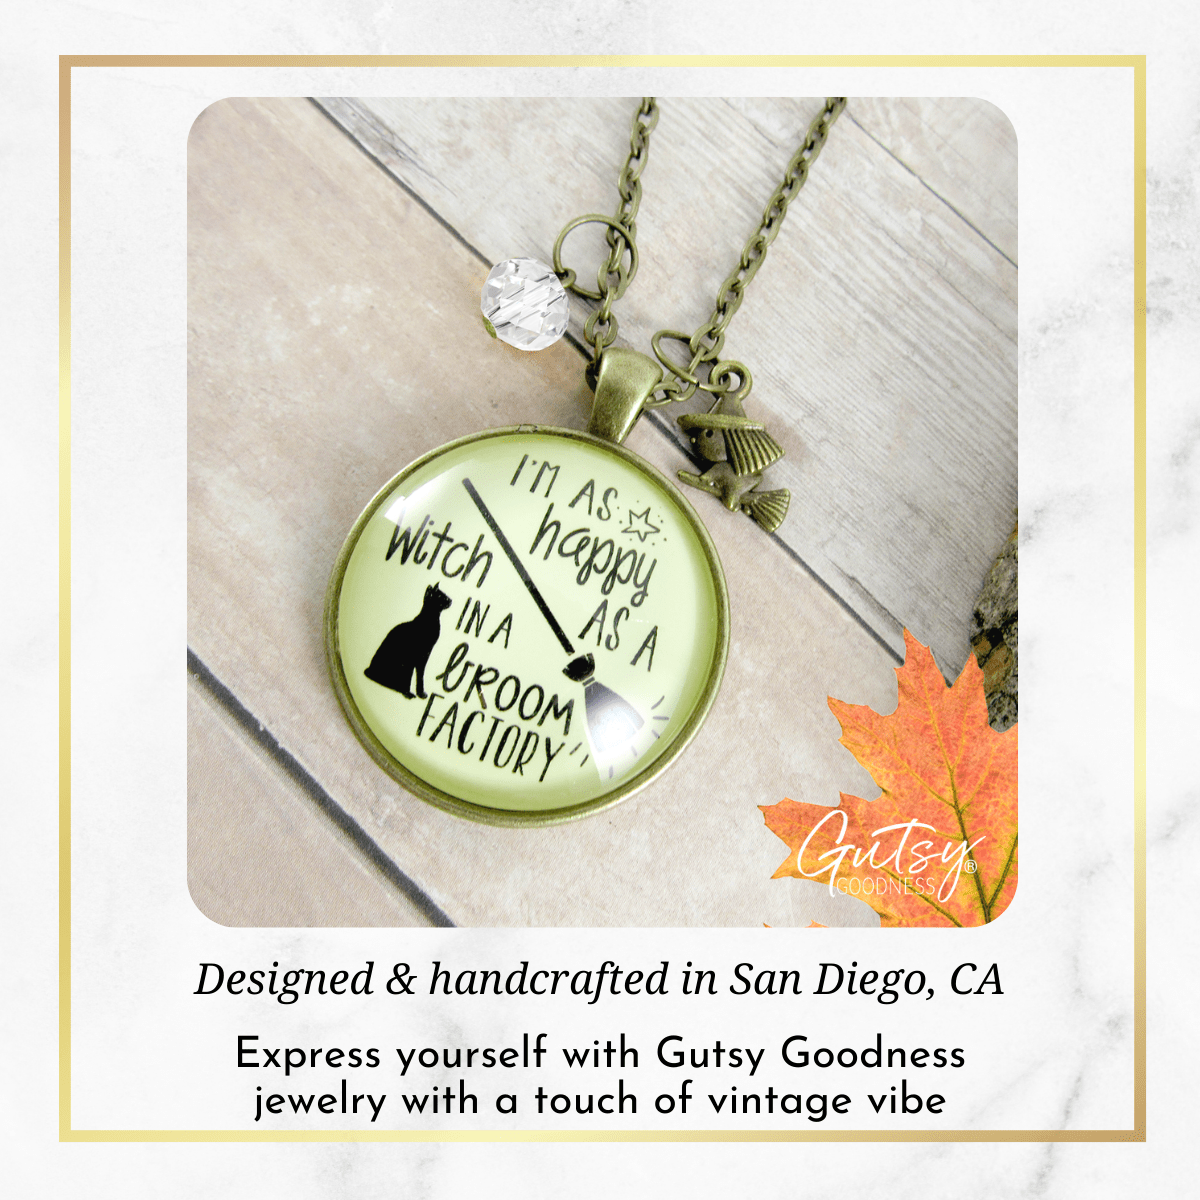 Gutsy Goodness I'm Happy as Witch Necklace Broom Factory Funny Halloween Jewelry - Gutsy Goodness Handmade Jewelry;I'm Happy As Witch Necklace Broom Factory Funny Halloween Jewelry - Gutsy Goodness Handmade Jewelry Gifts